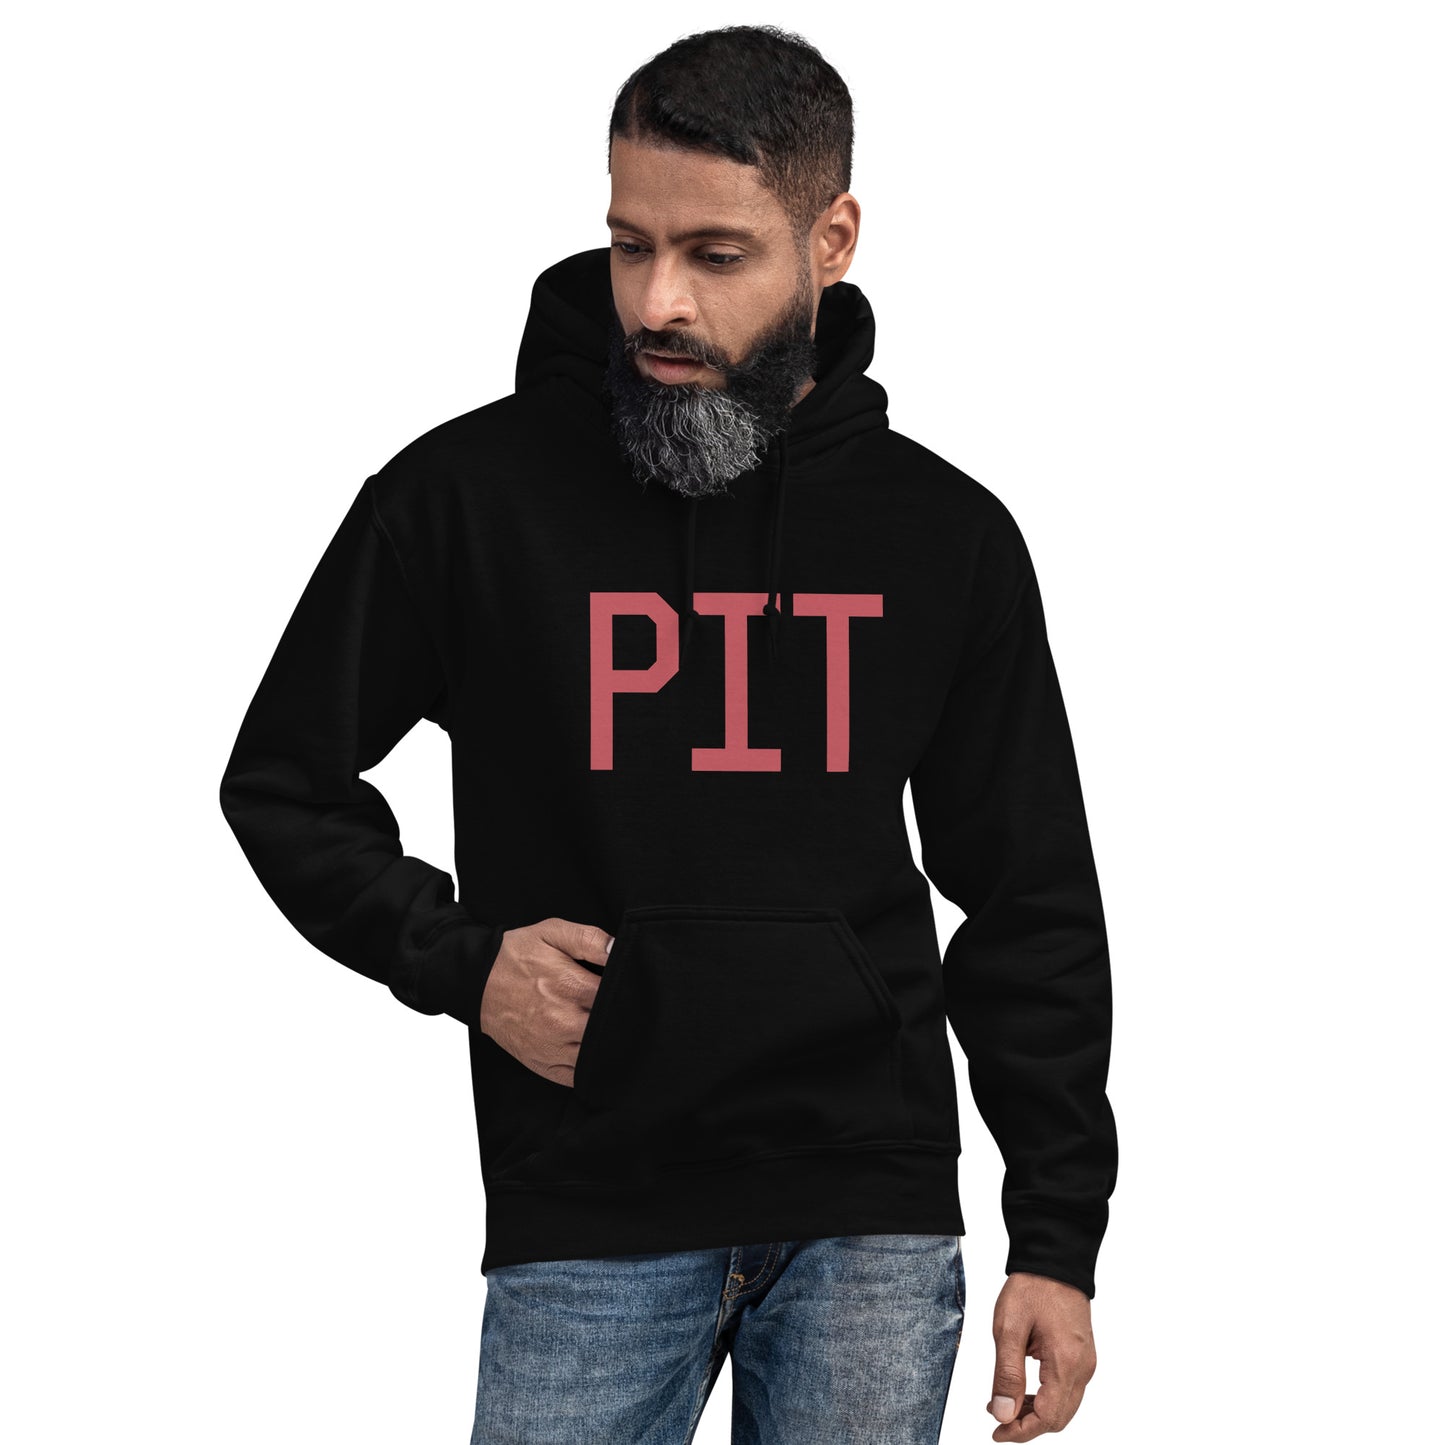 Aviation Enthusiast Hoodie - Deep Pink Graphic • PIT Pittsburgh • YHM Designs - Image 05